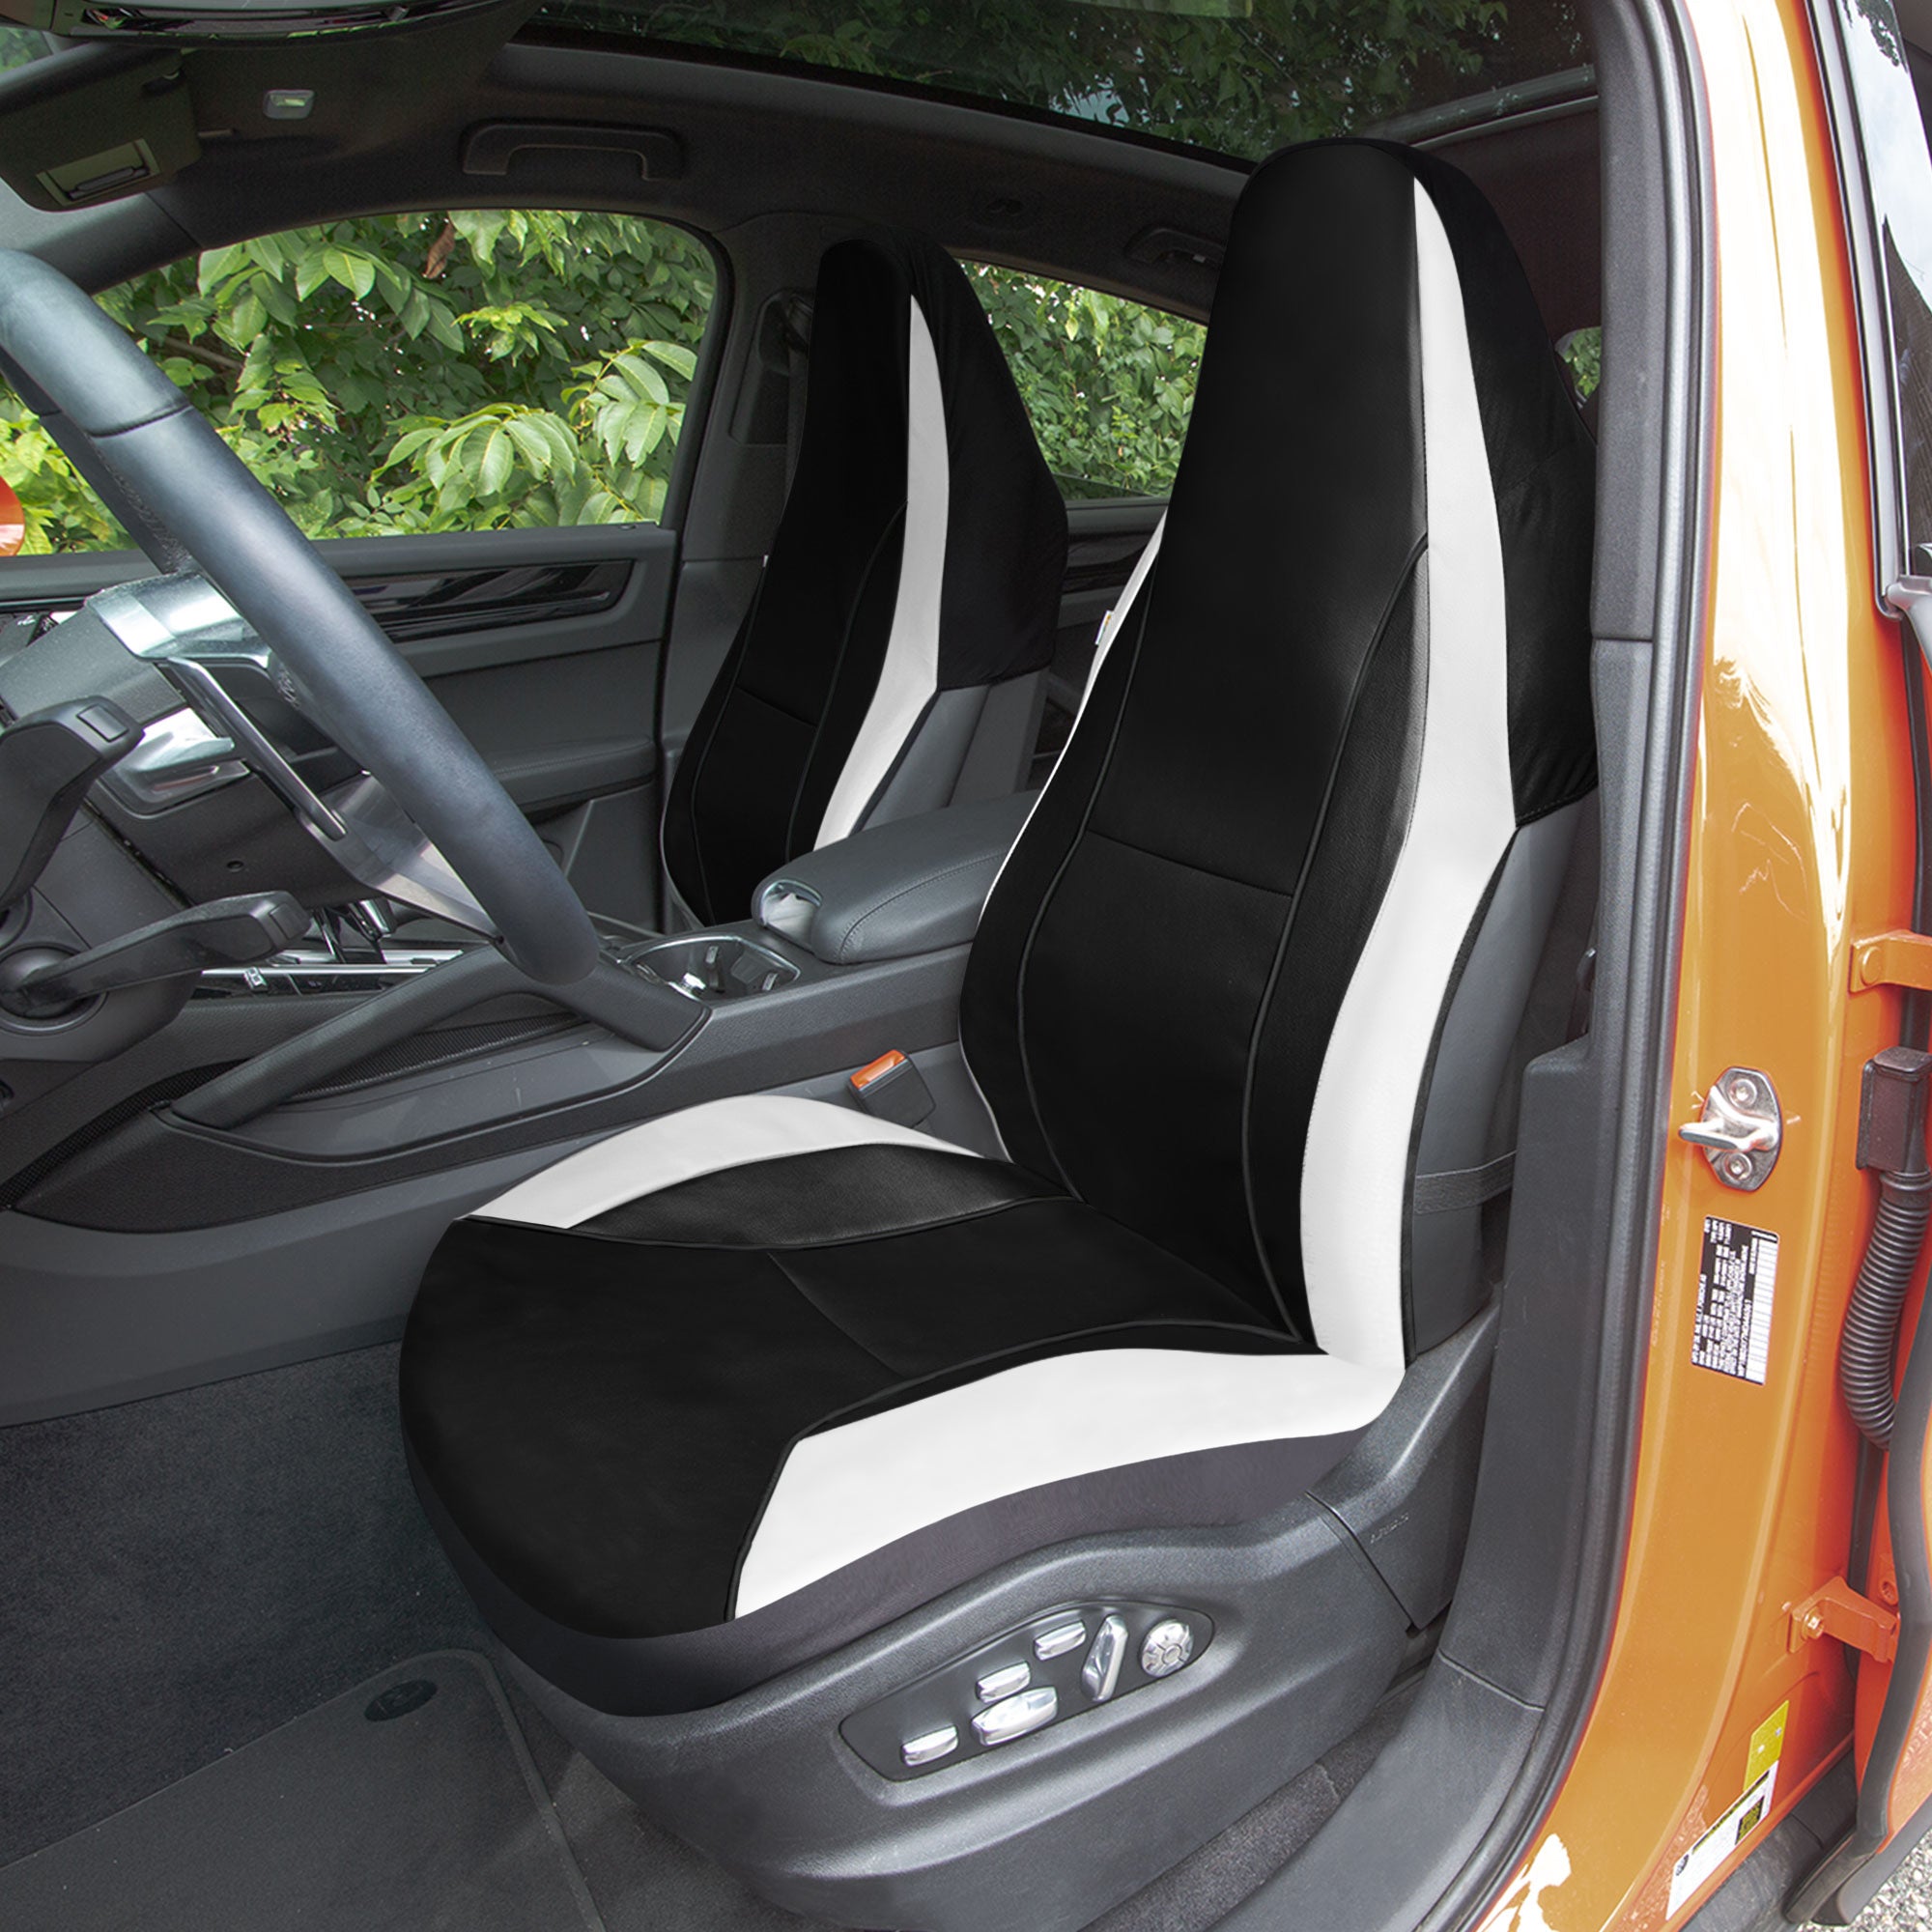 Bold Contrasting Leatherette Seat Covers Full Set - Black